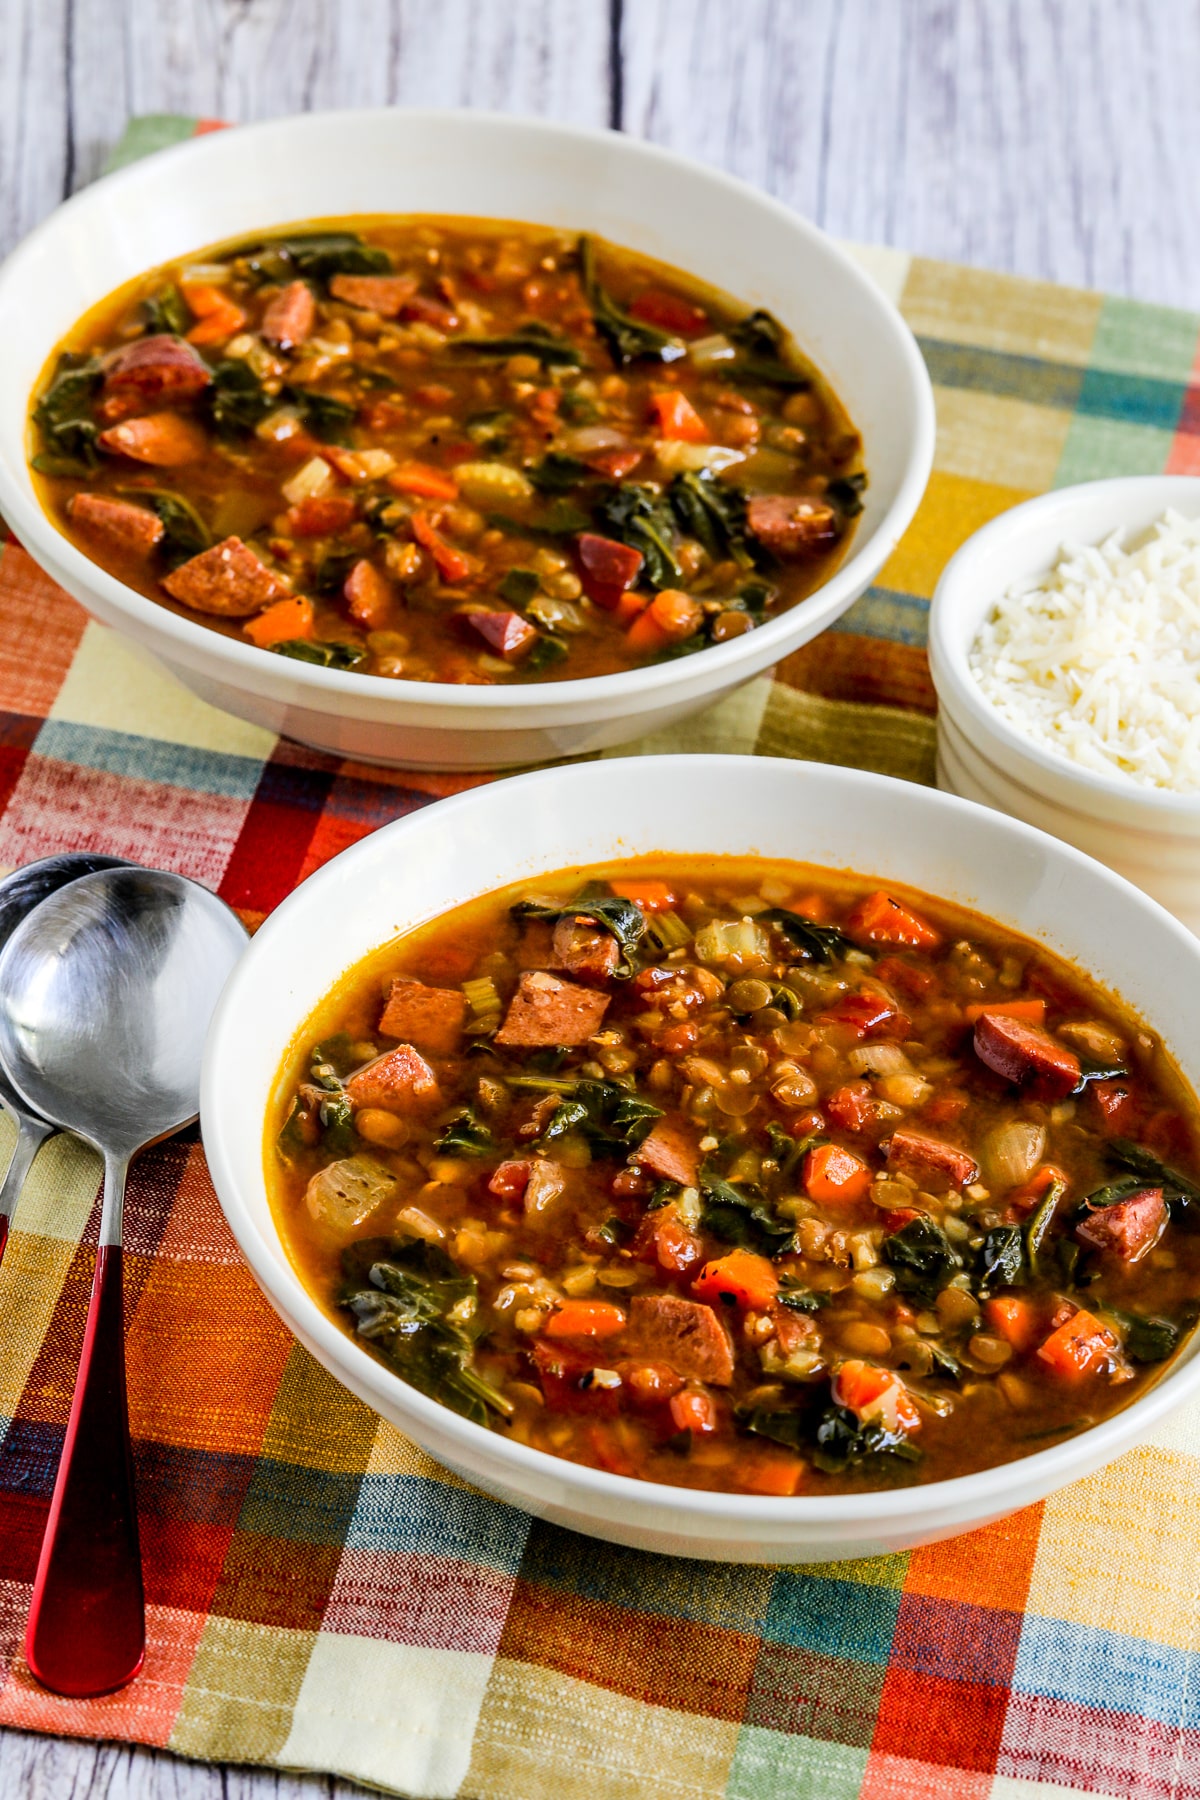 Lentil sausage soup with clarified spinach in two soup bowls